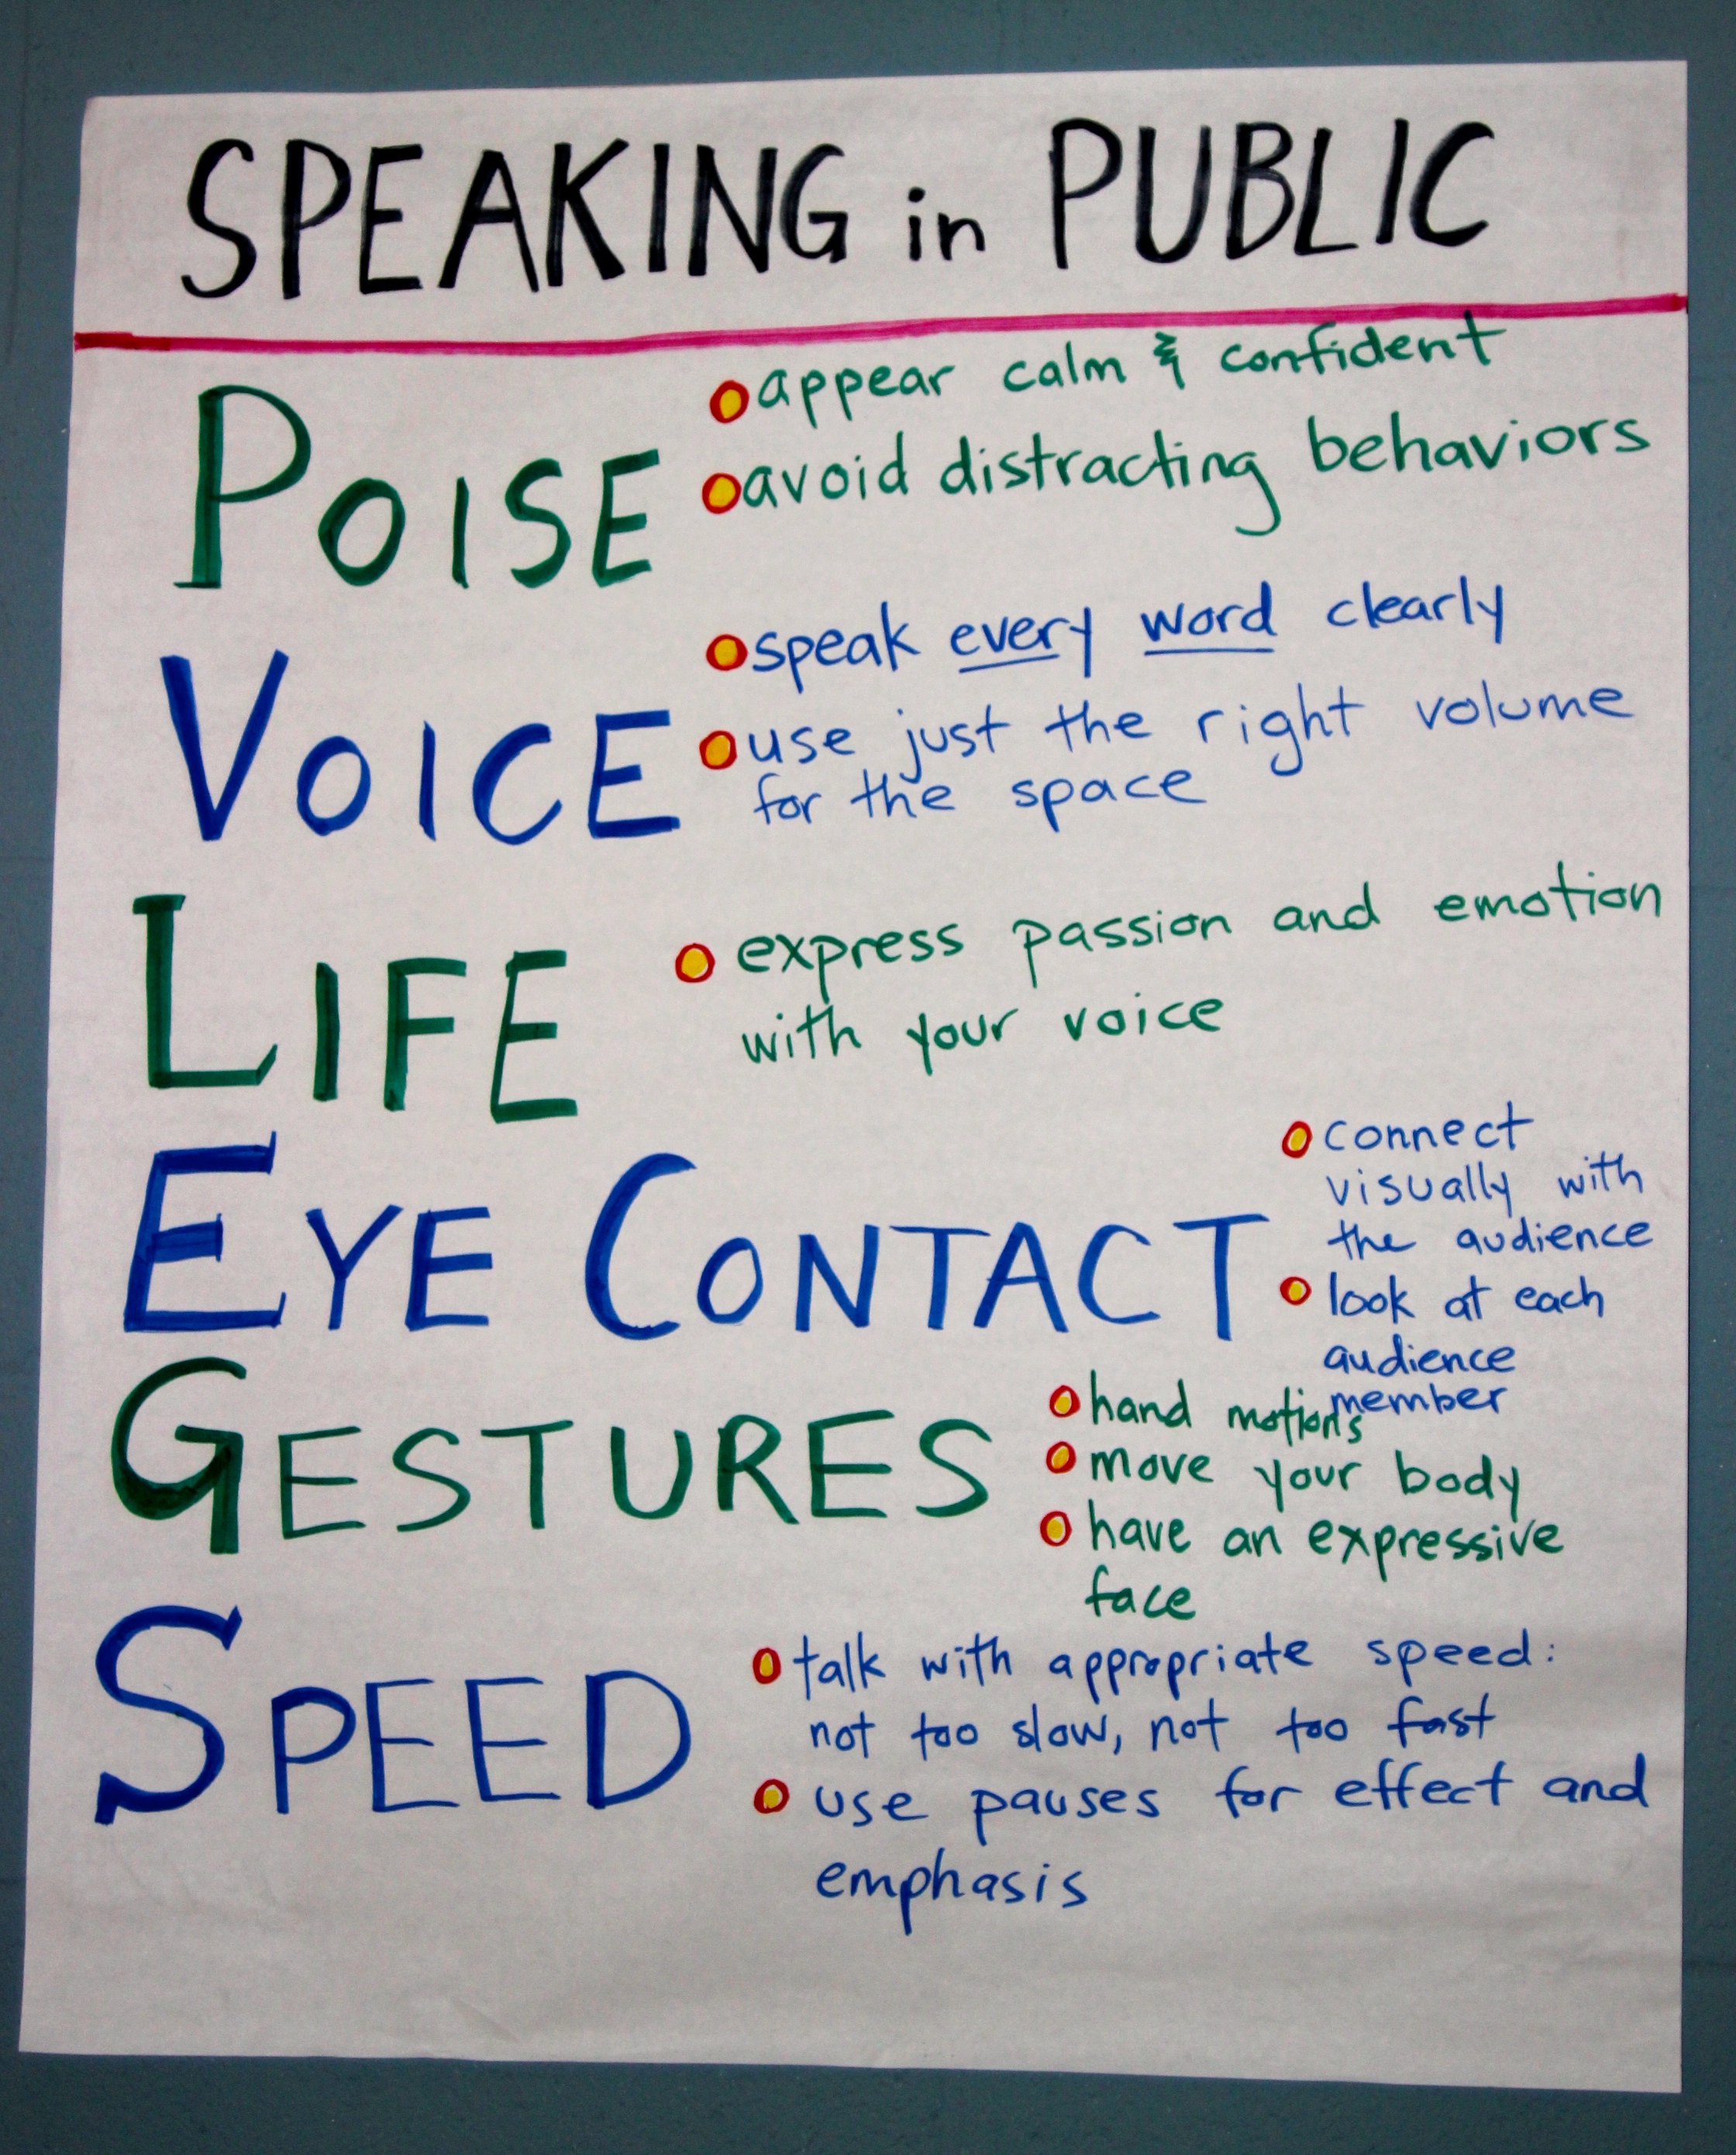 PVLEGS: A Public Speaking Acronym that Transforms Students - Dave